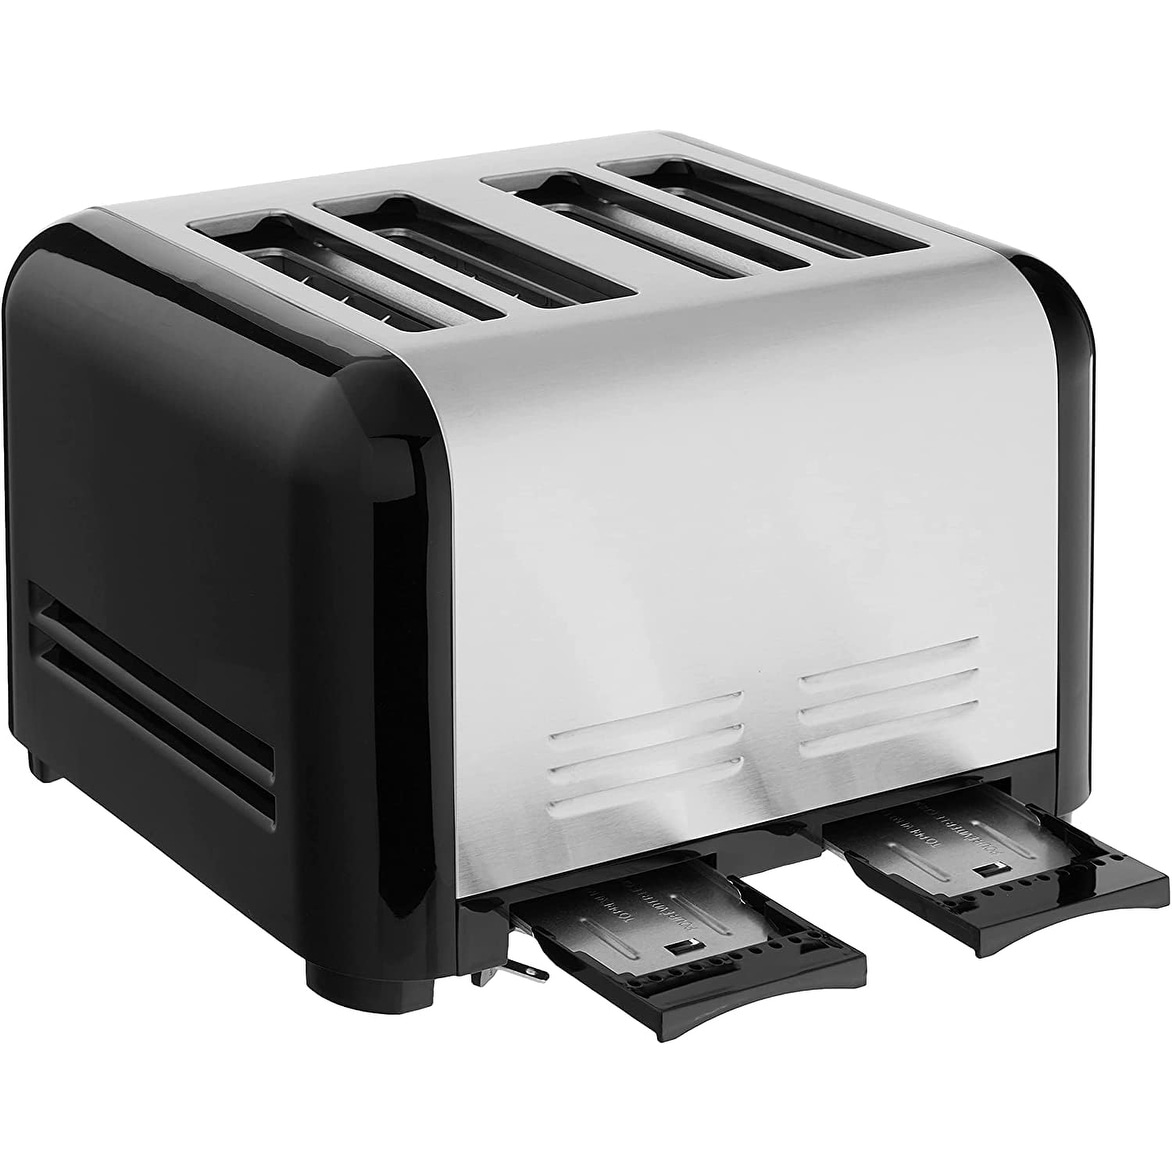 Cuisinart 4-Slice Compact Metal Toaster Cpt-435, Silver